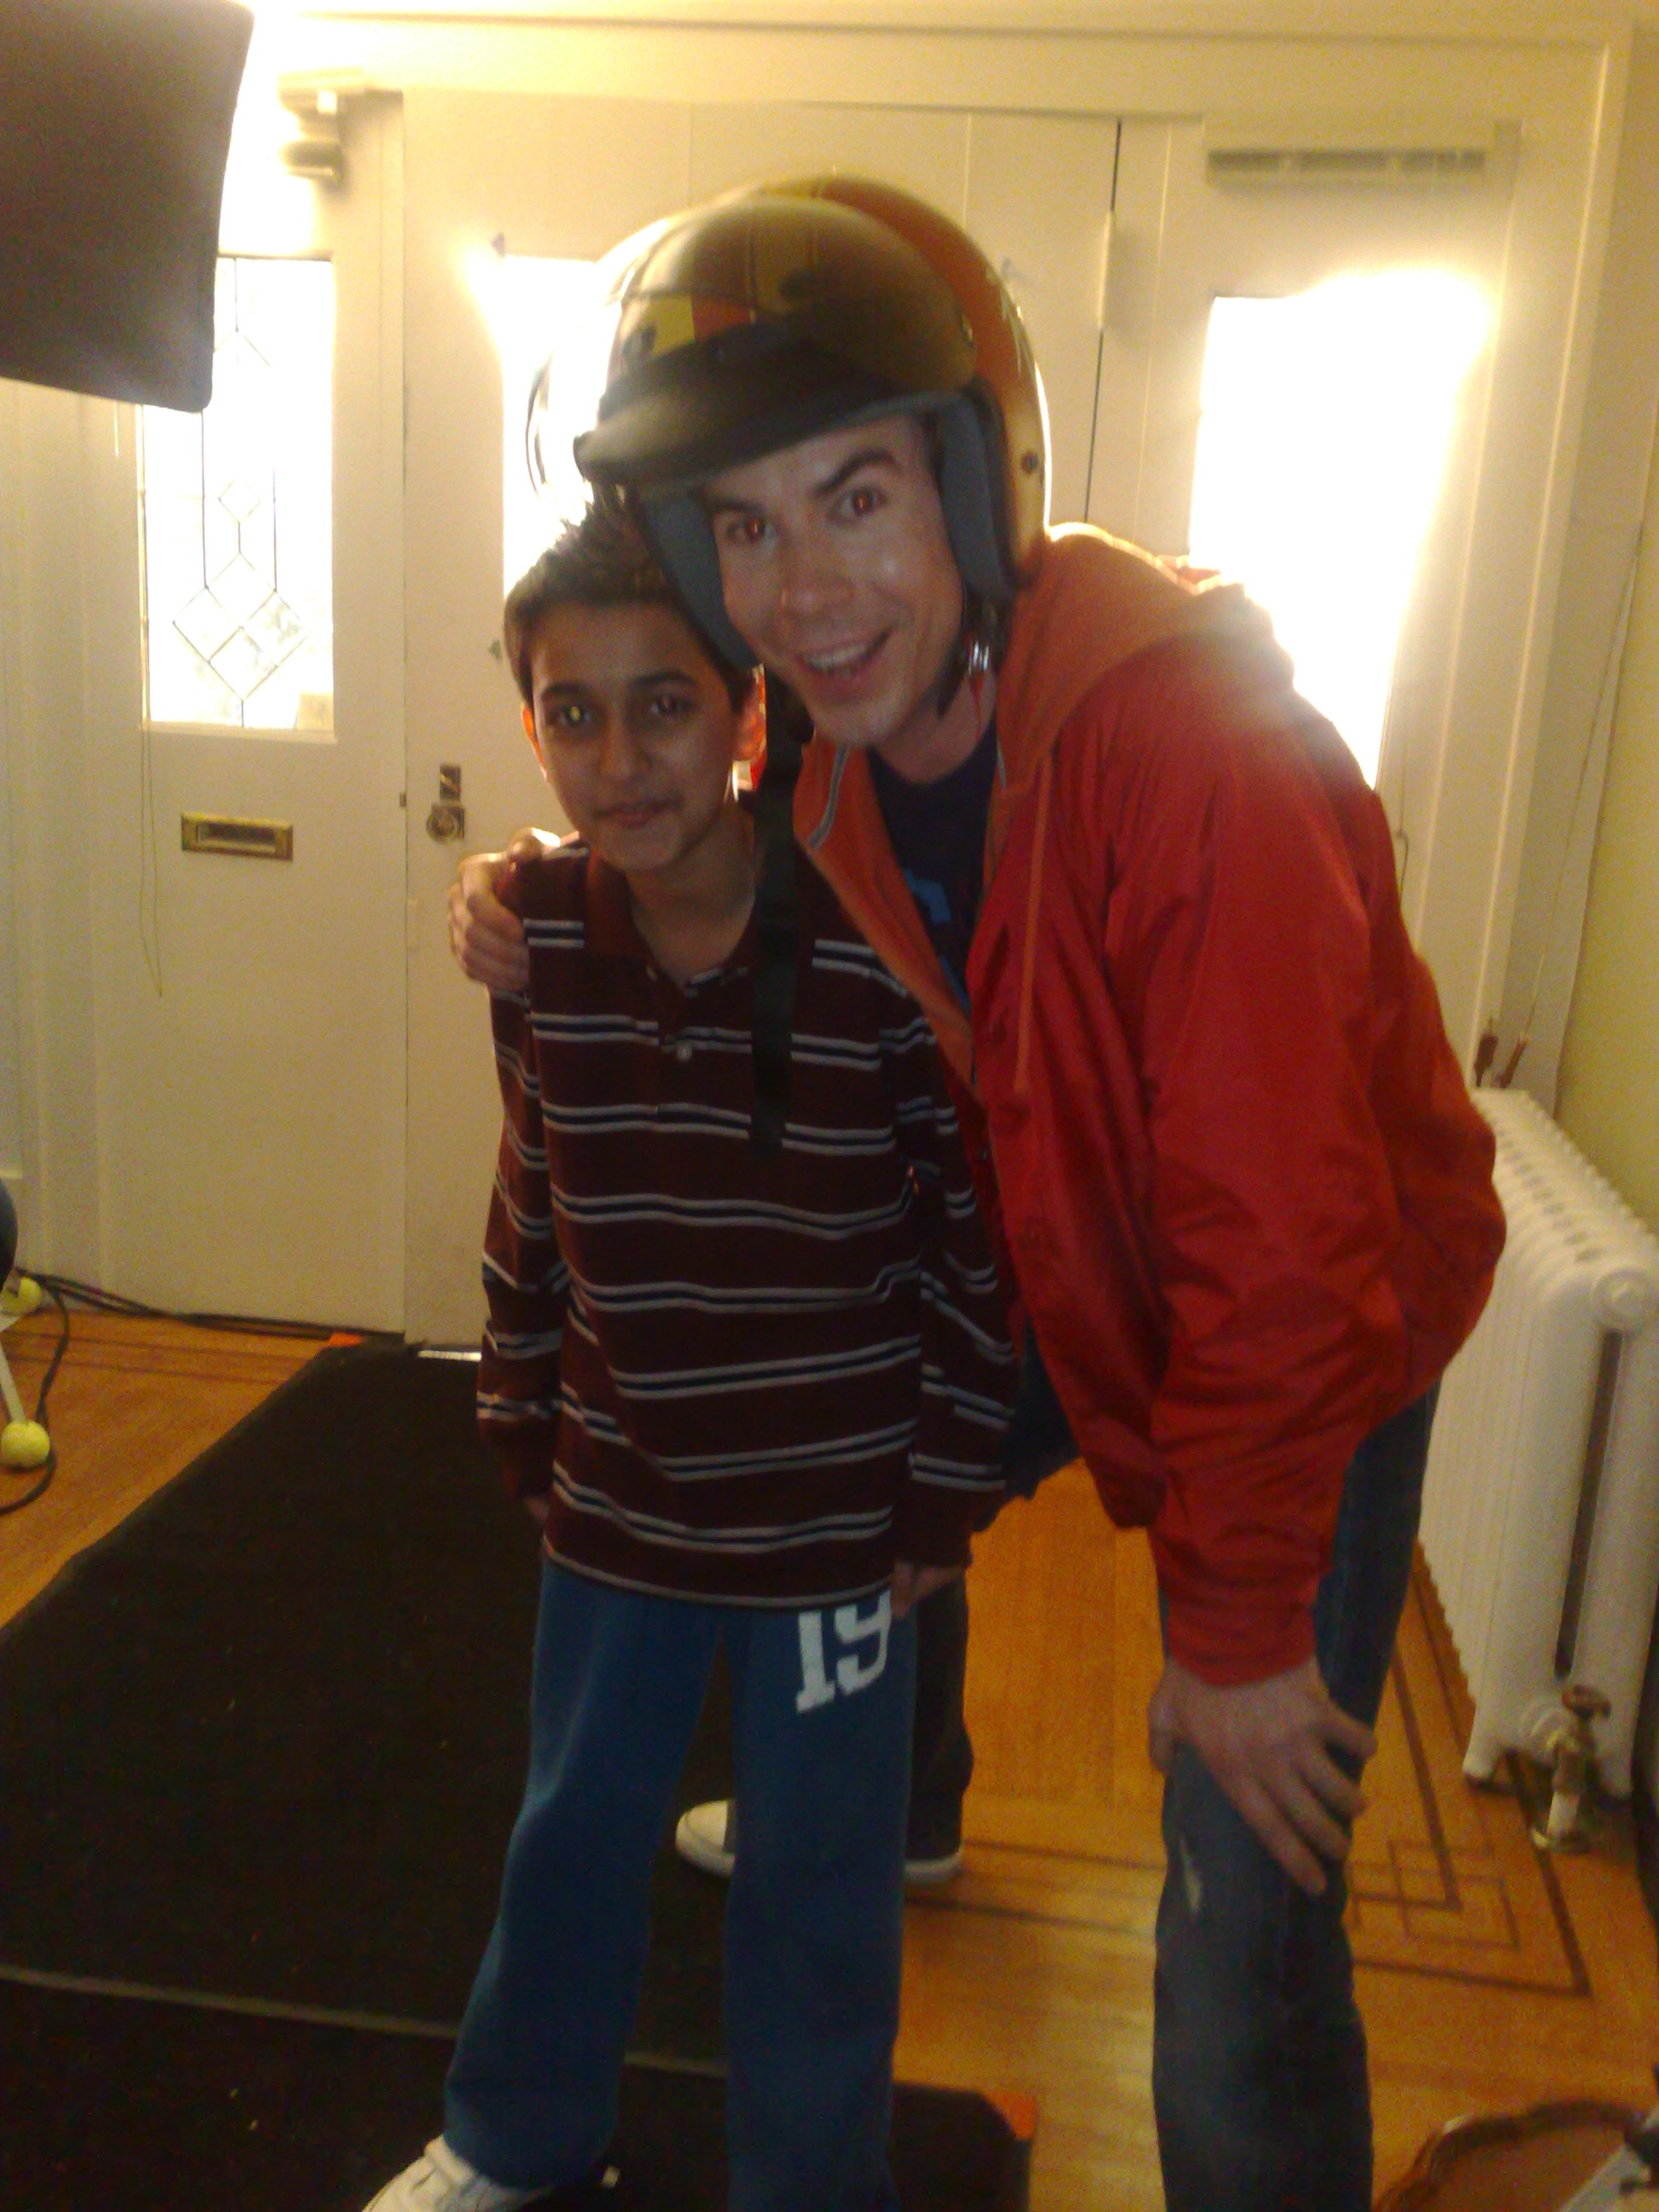 Me with Jerry Trainor on set in The Best Player movie